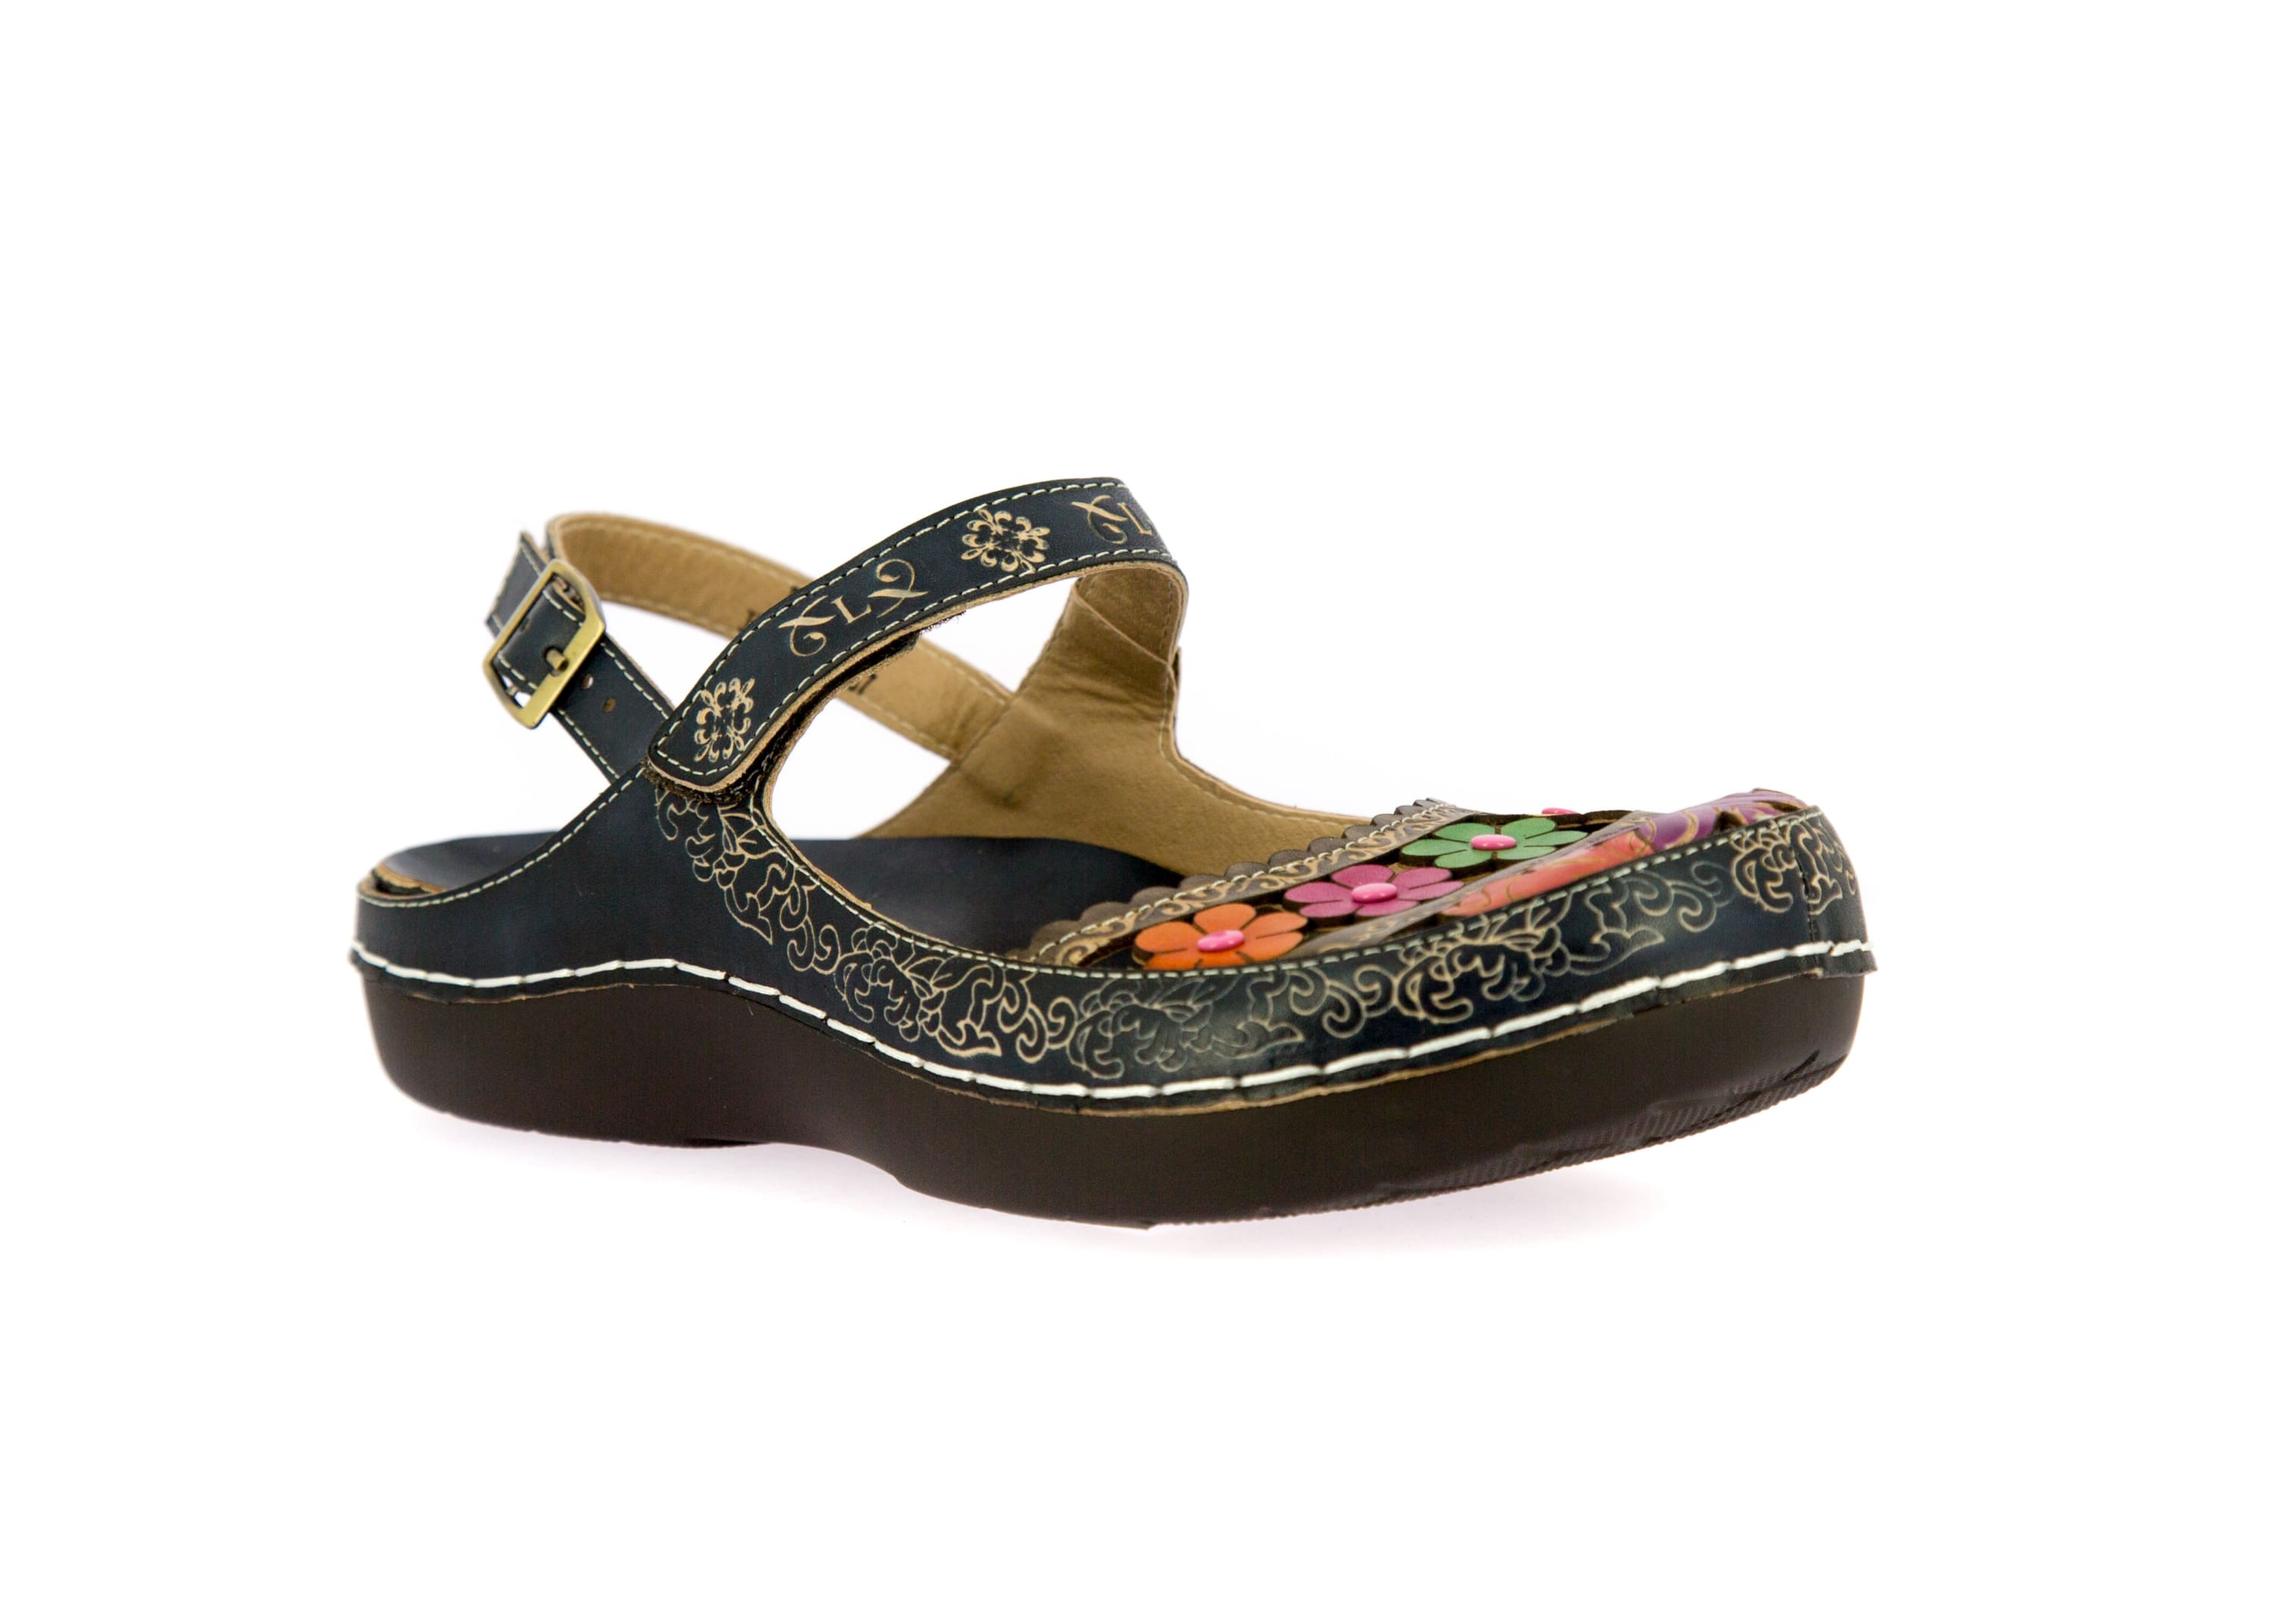 BILLY 51 Shoes - Sandal